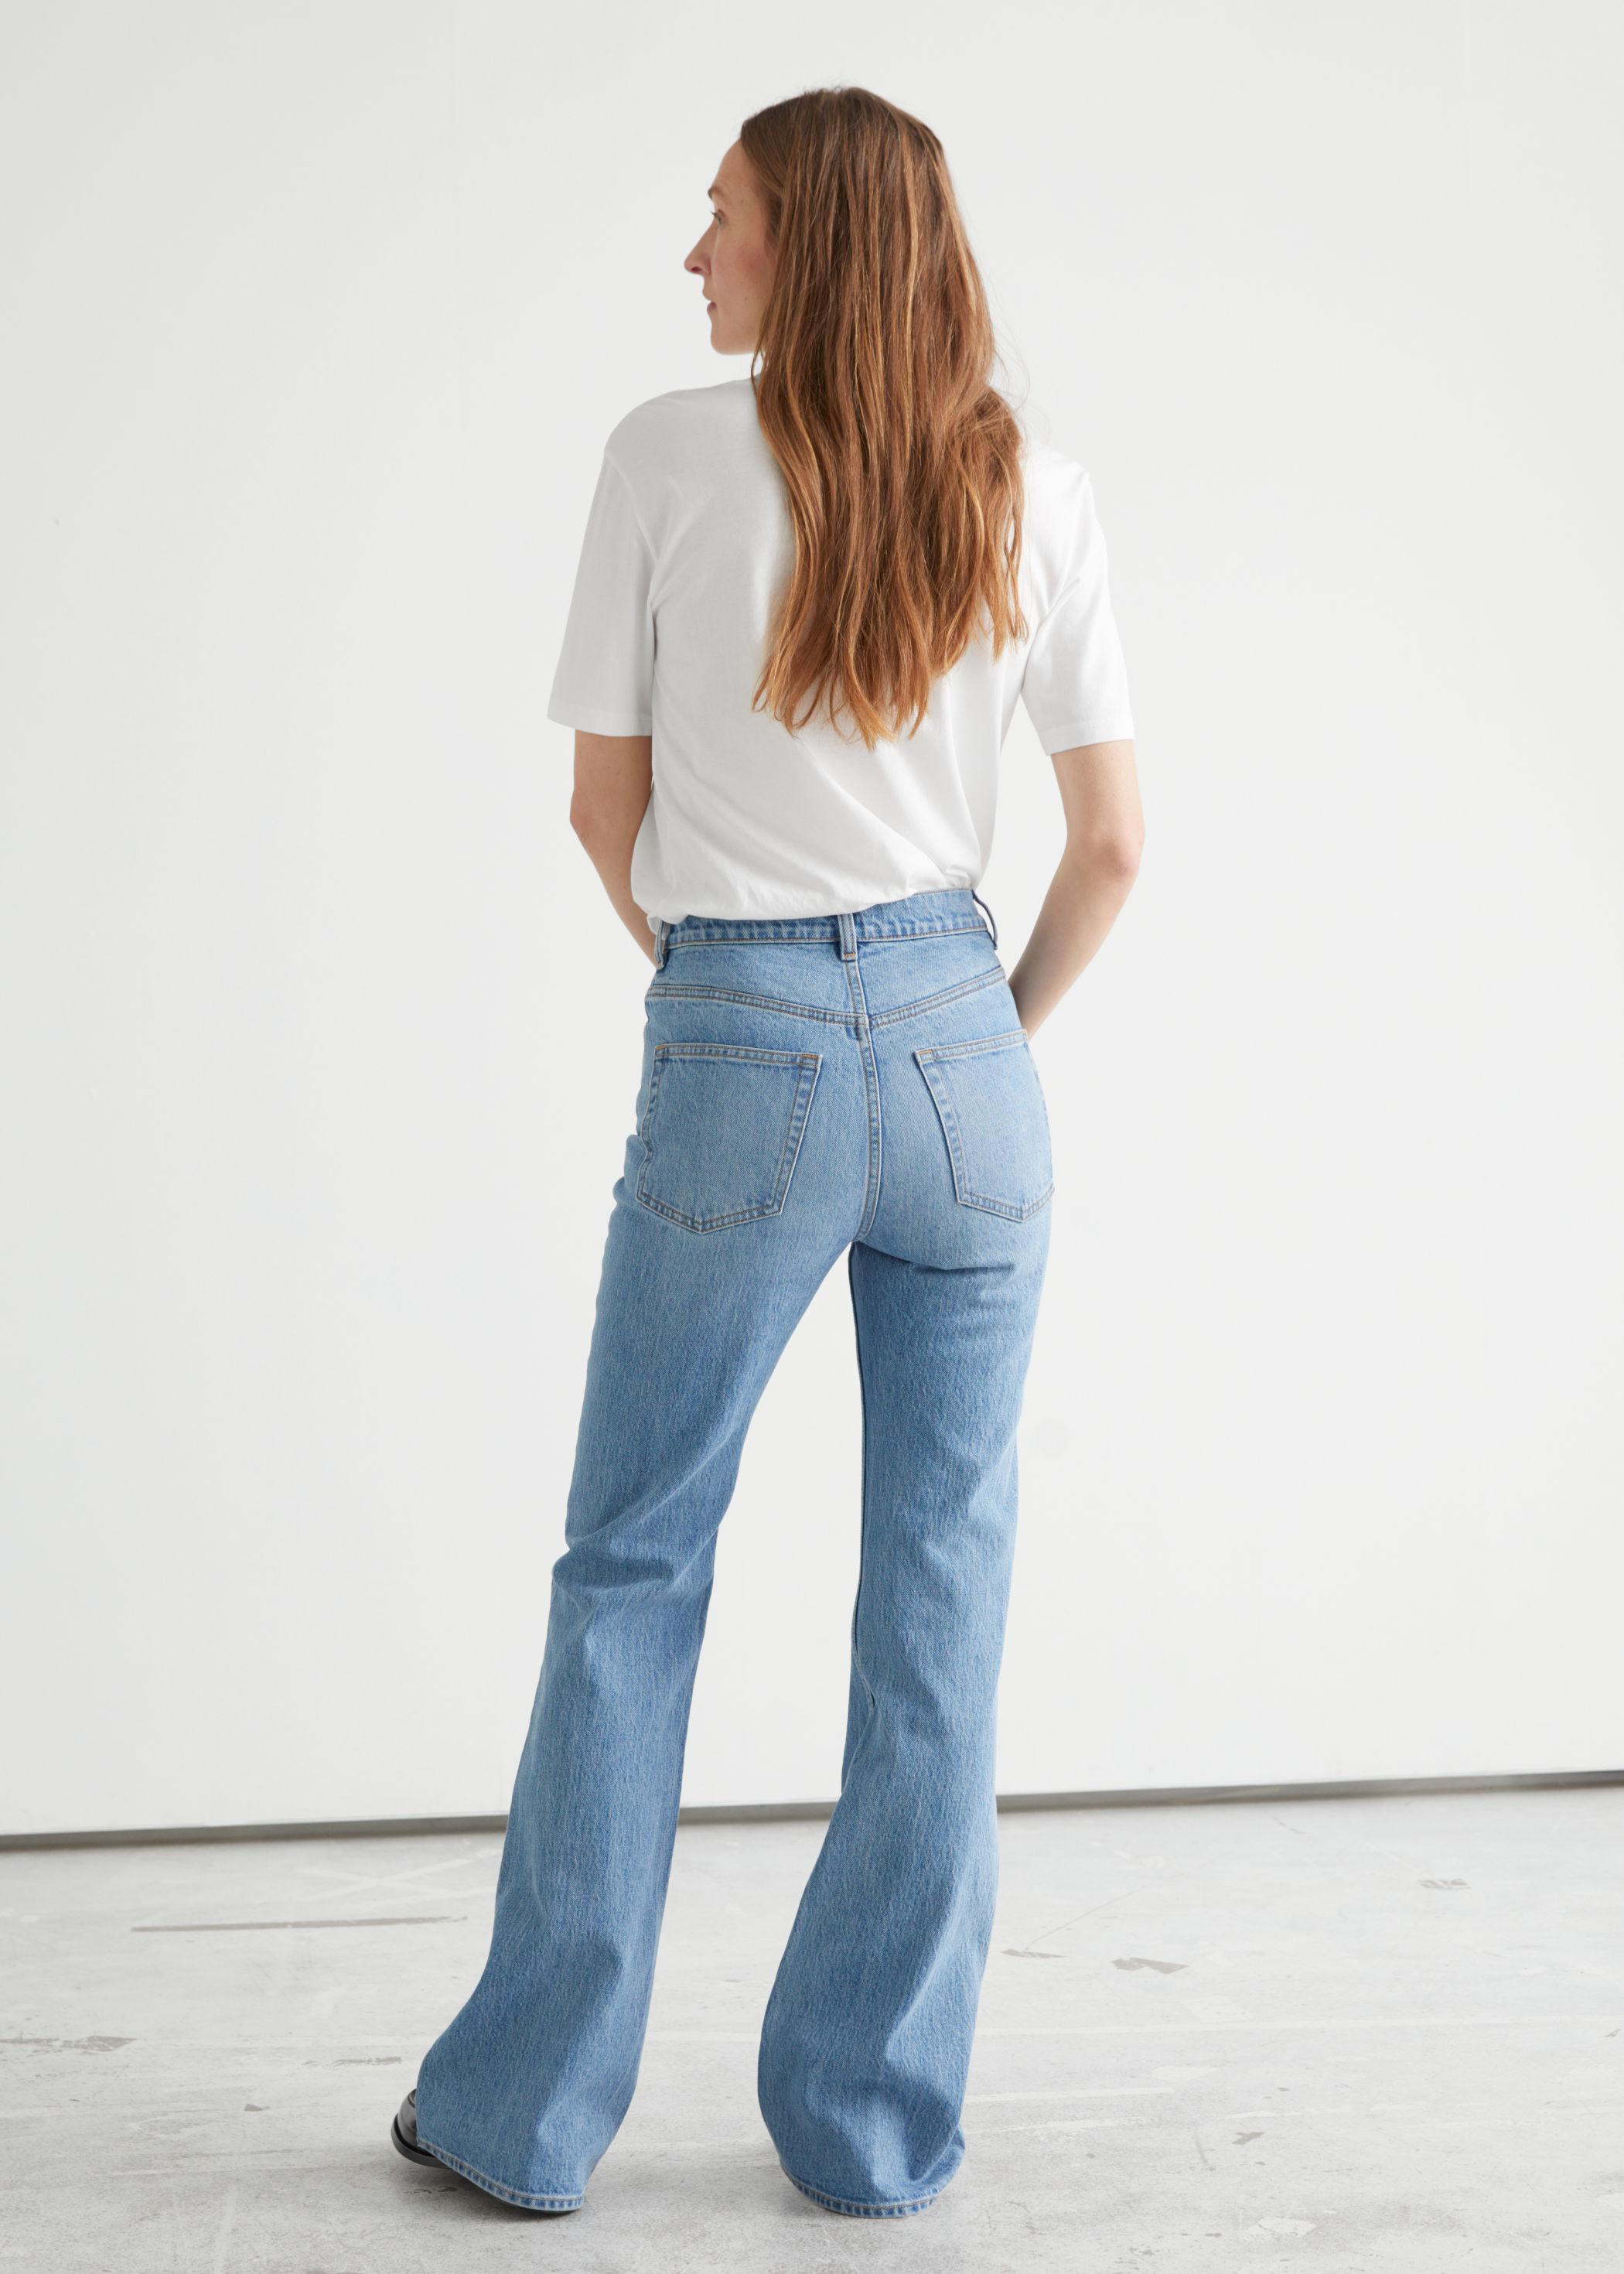 & Other Stories Denim Mood Cut Jeans in Blue - Lyst